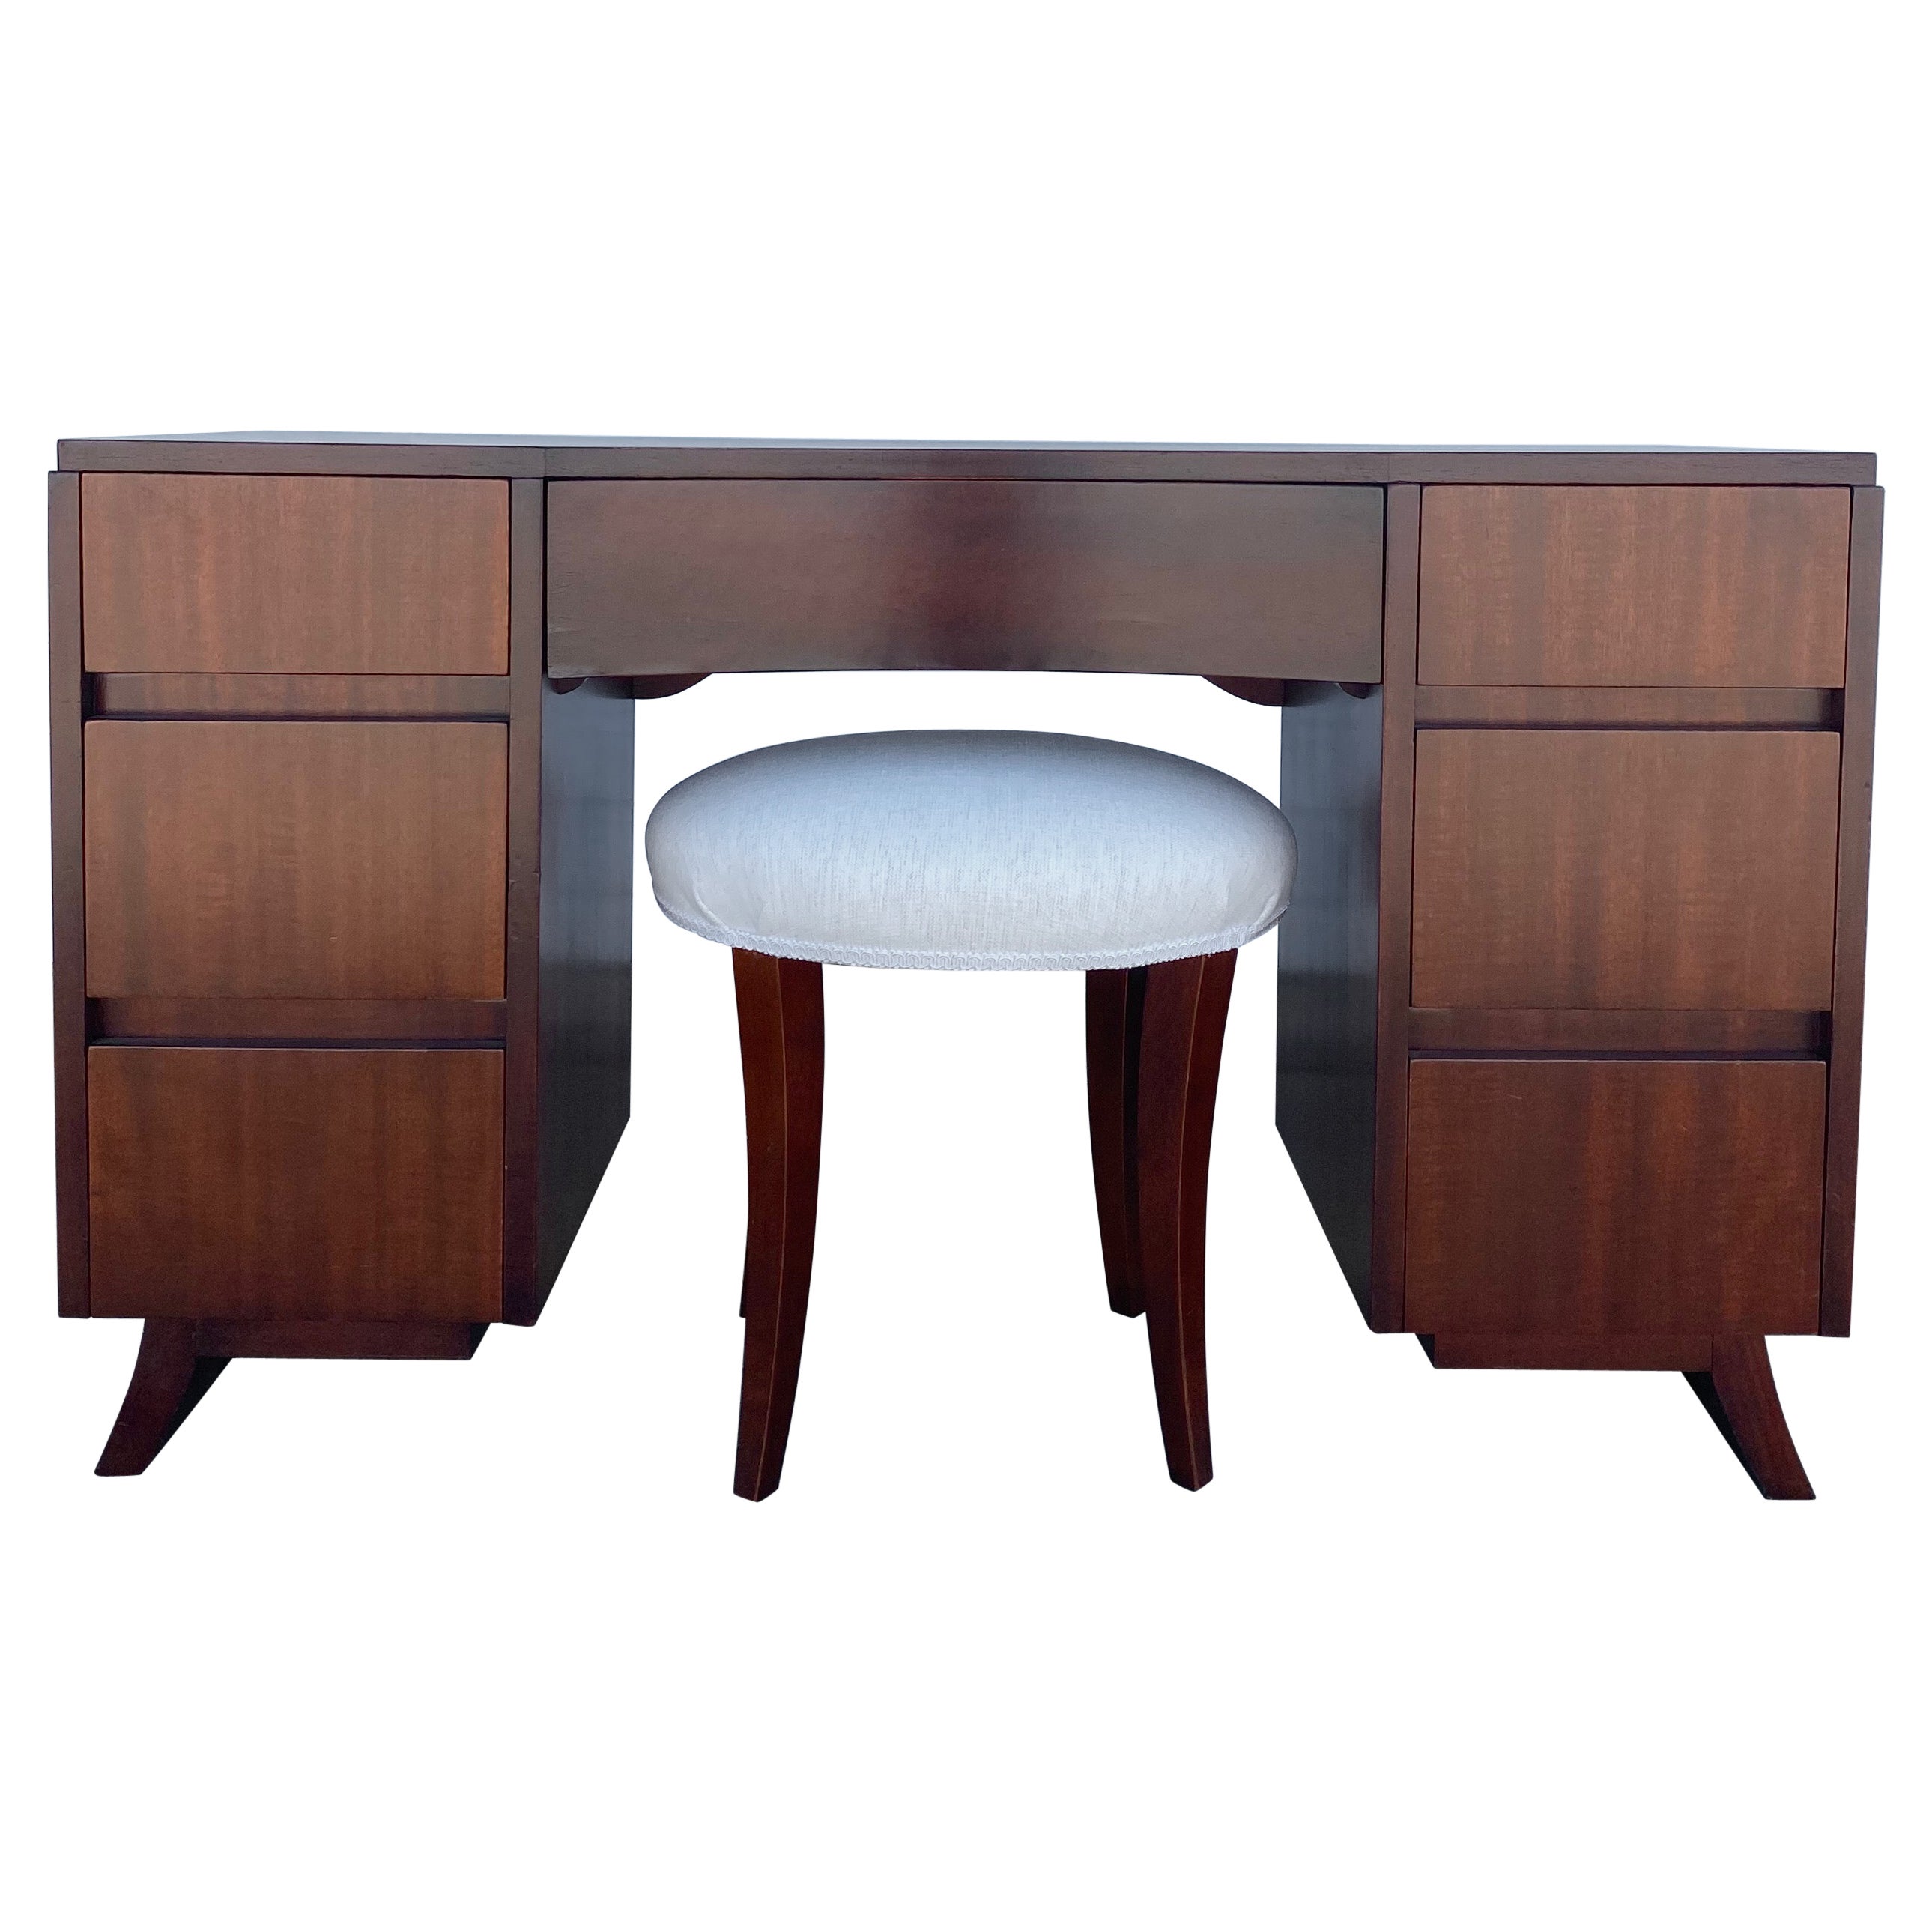 Mid-Century Modern Mahogany Vanity Desk with Stool by RWAY Furniture Co